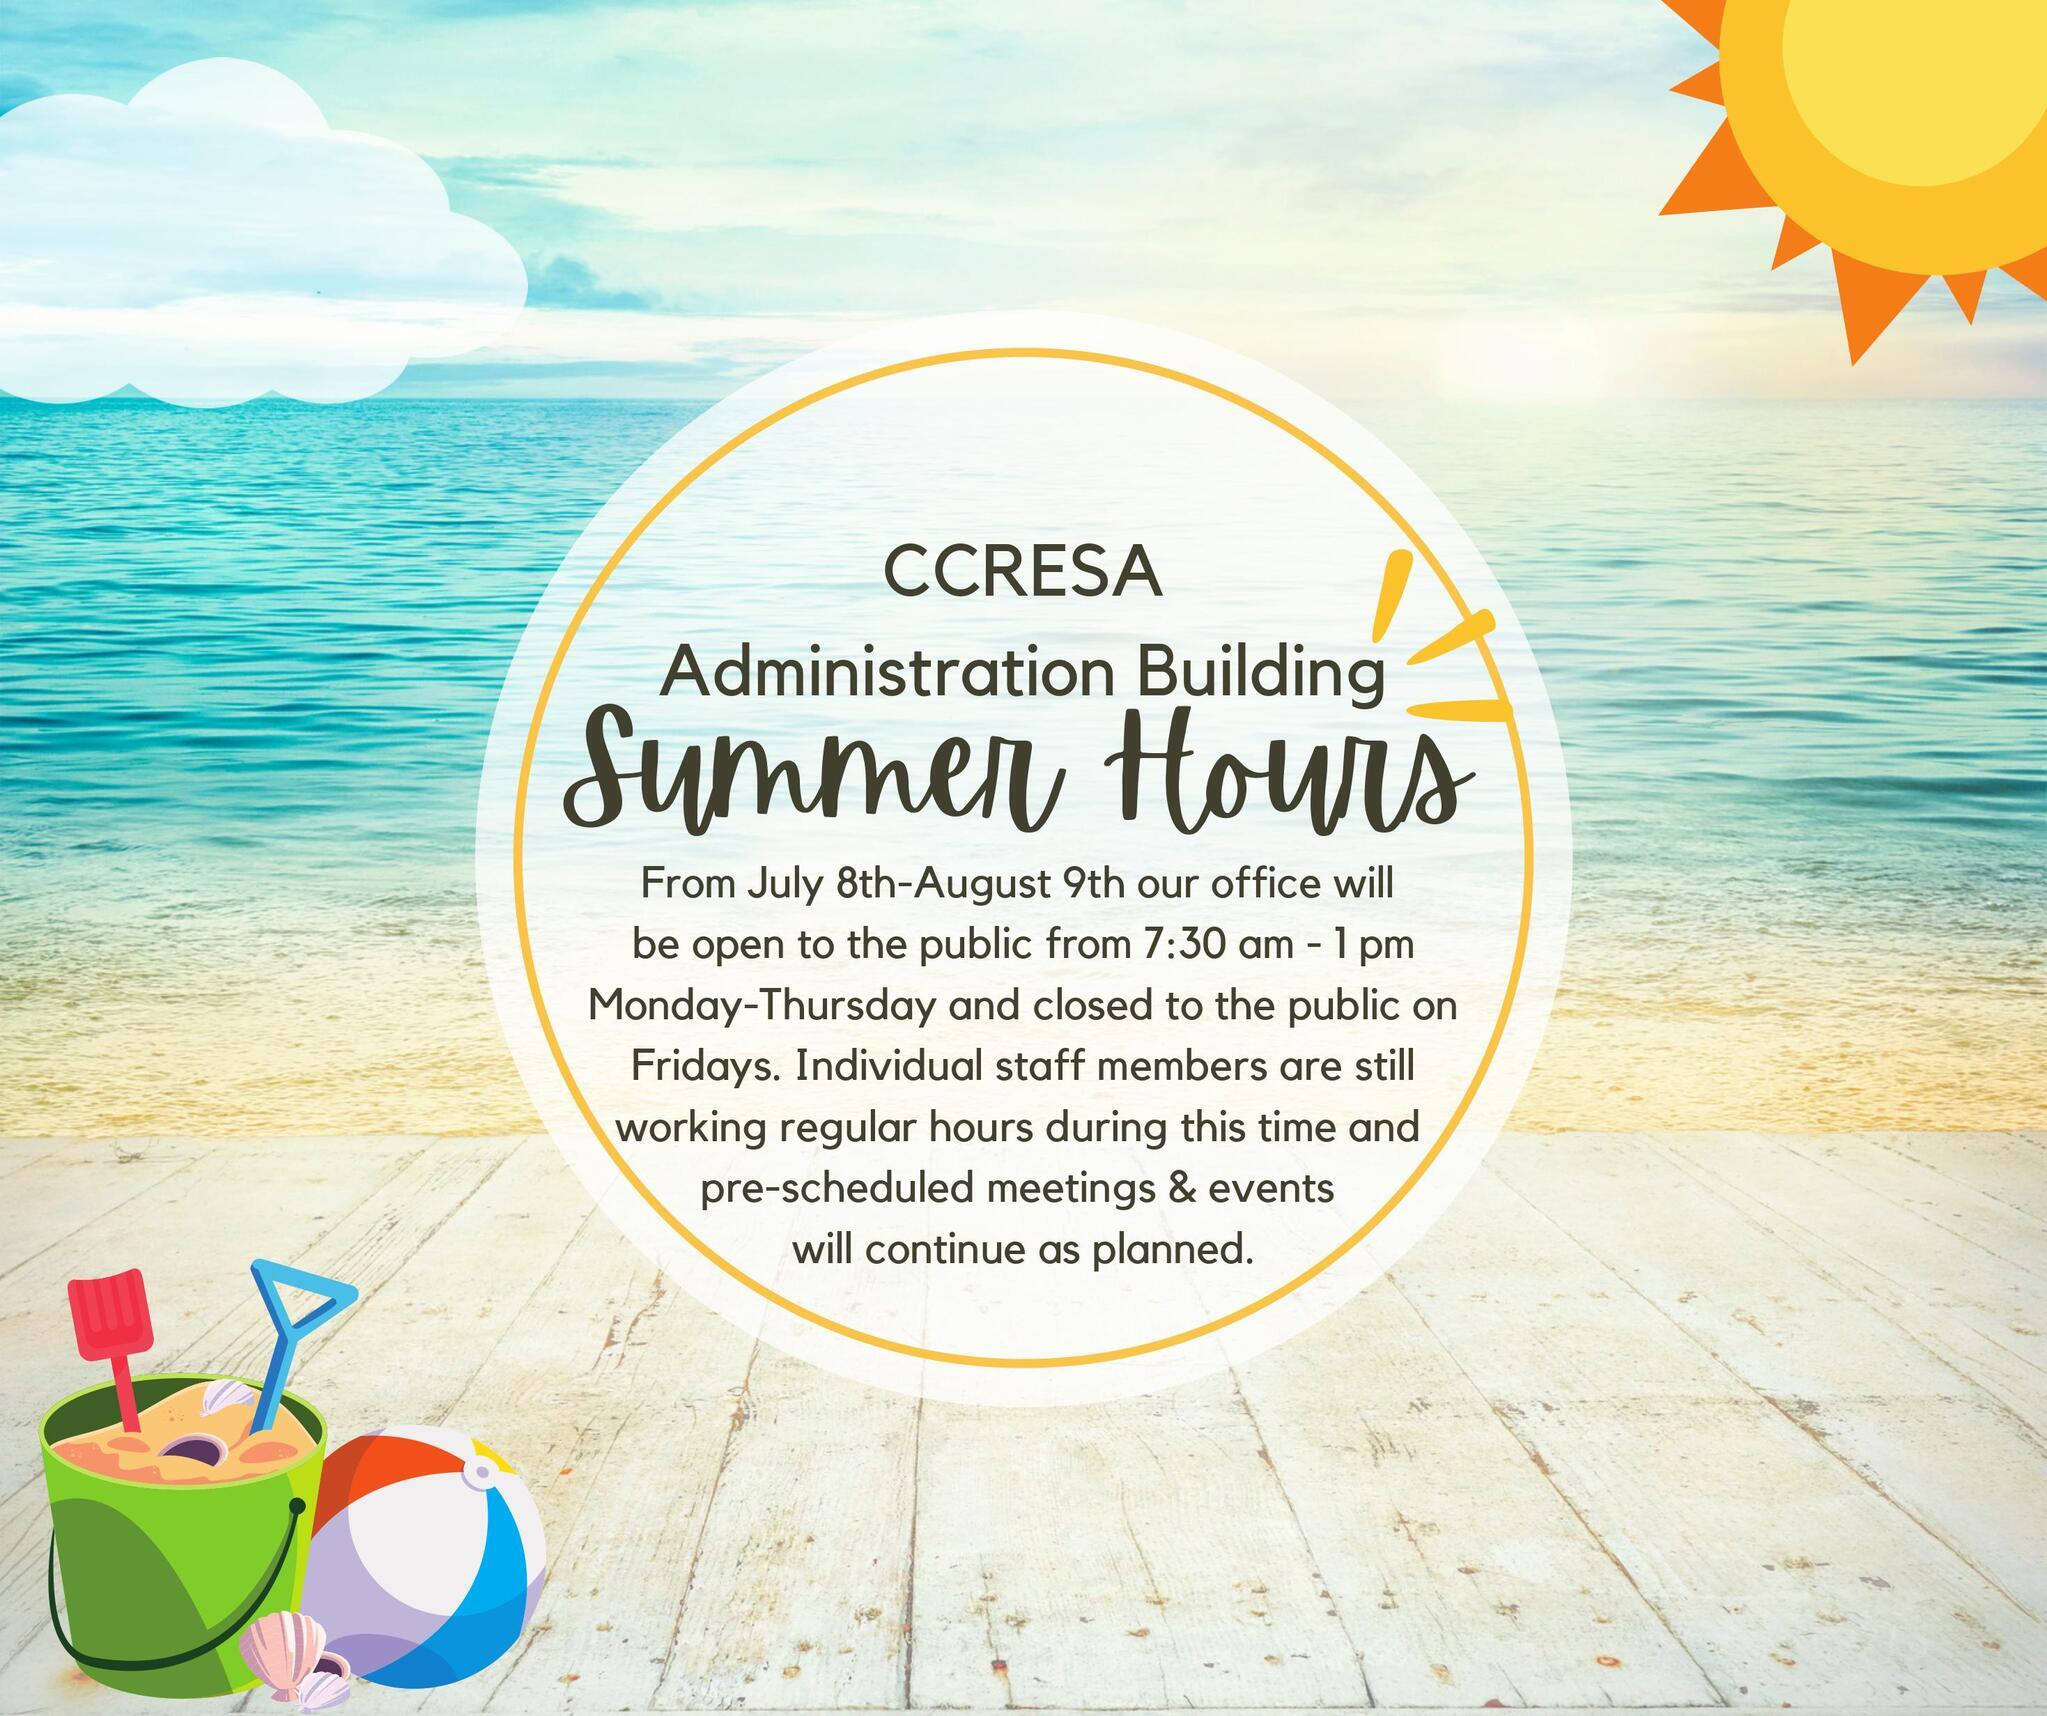 CCRESA  Administration Building  Summer Hours  From July 8th-August 9th our office will  be open to the public from 7:30 am - 1 pm  Monday-Thursday and closed to the public on  Fridays. Individual staff members are still  working regular hours during this time and  pre-scheduled meetings & events will continue as planned.